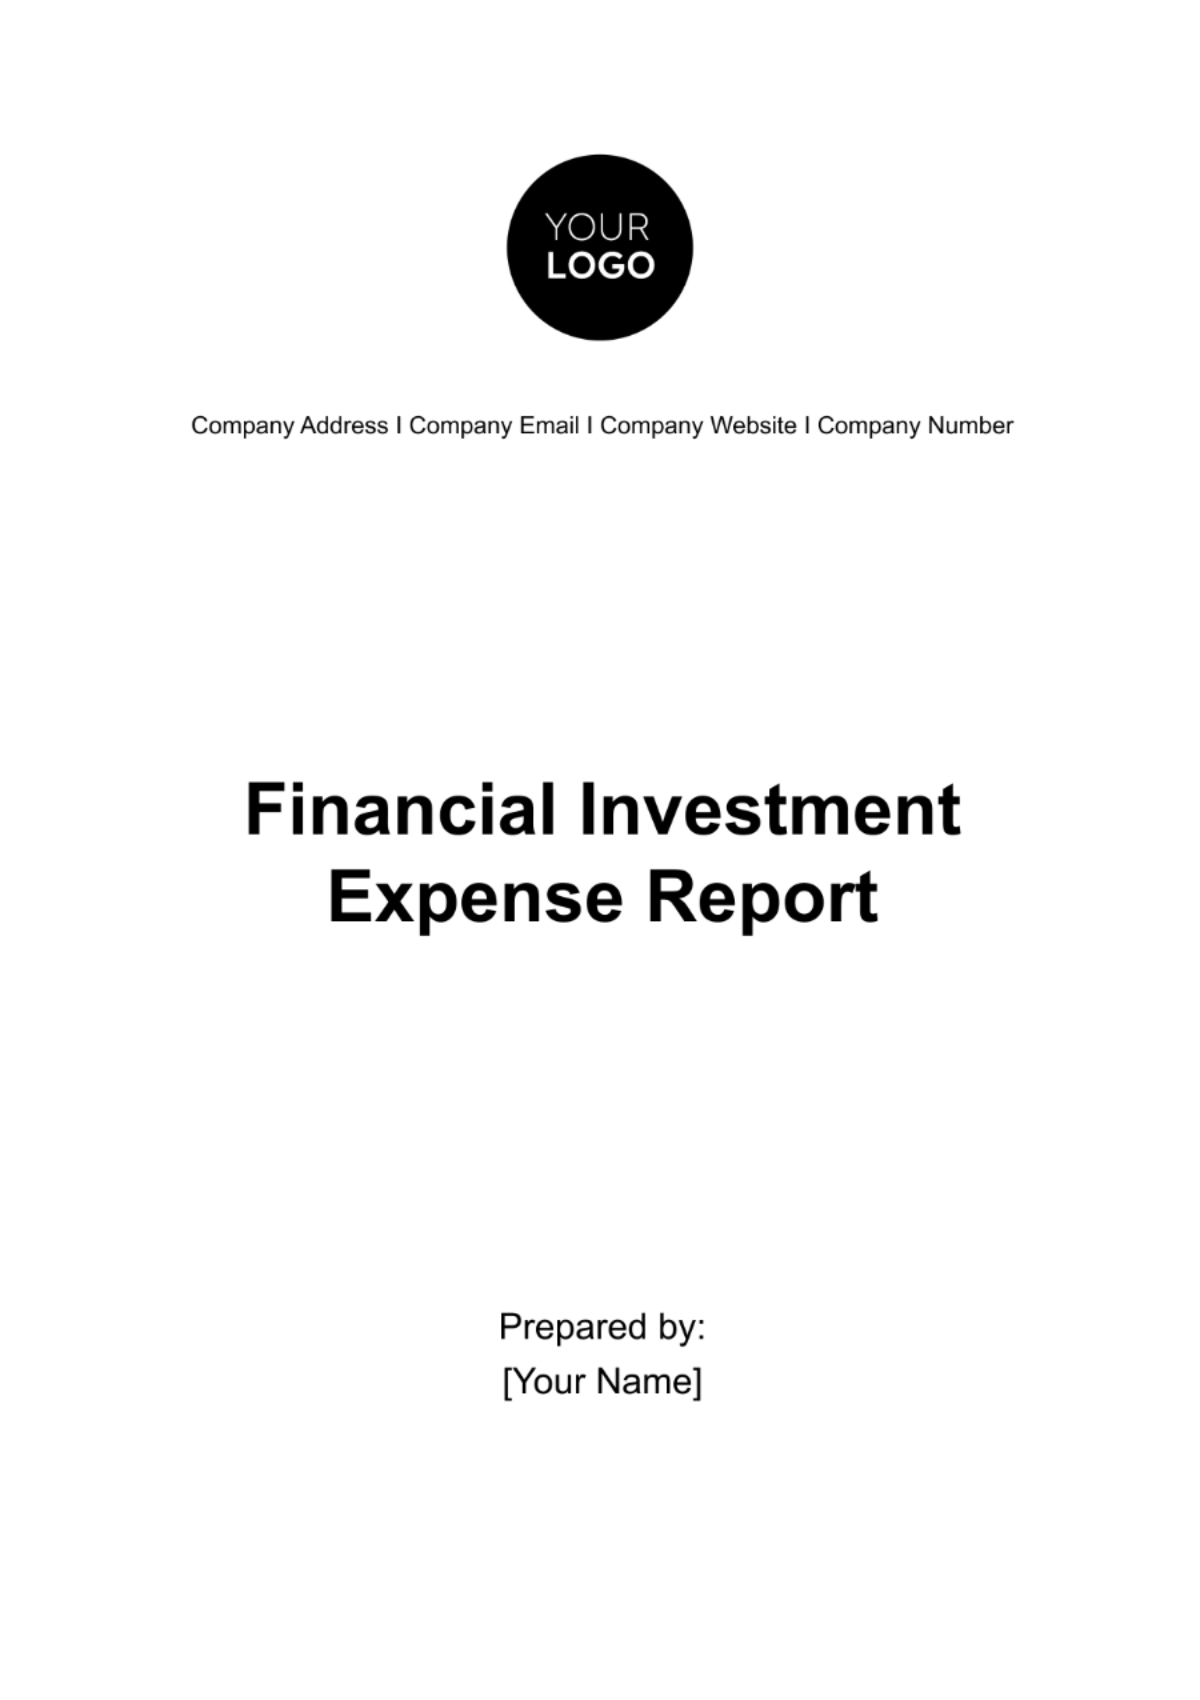 Financial Investment Expense Report Template